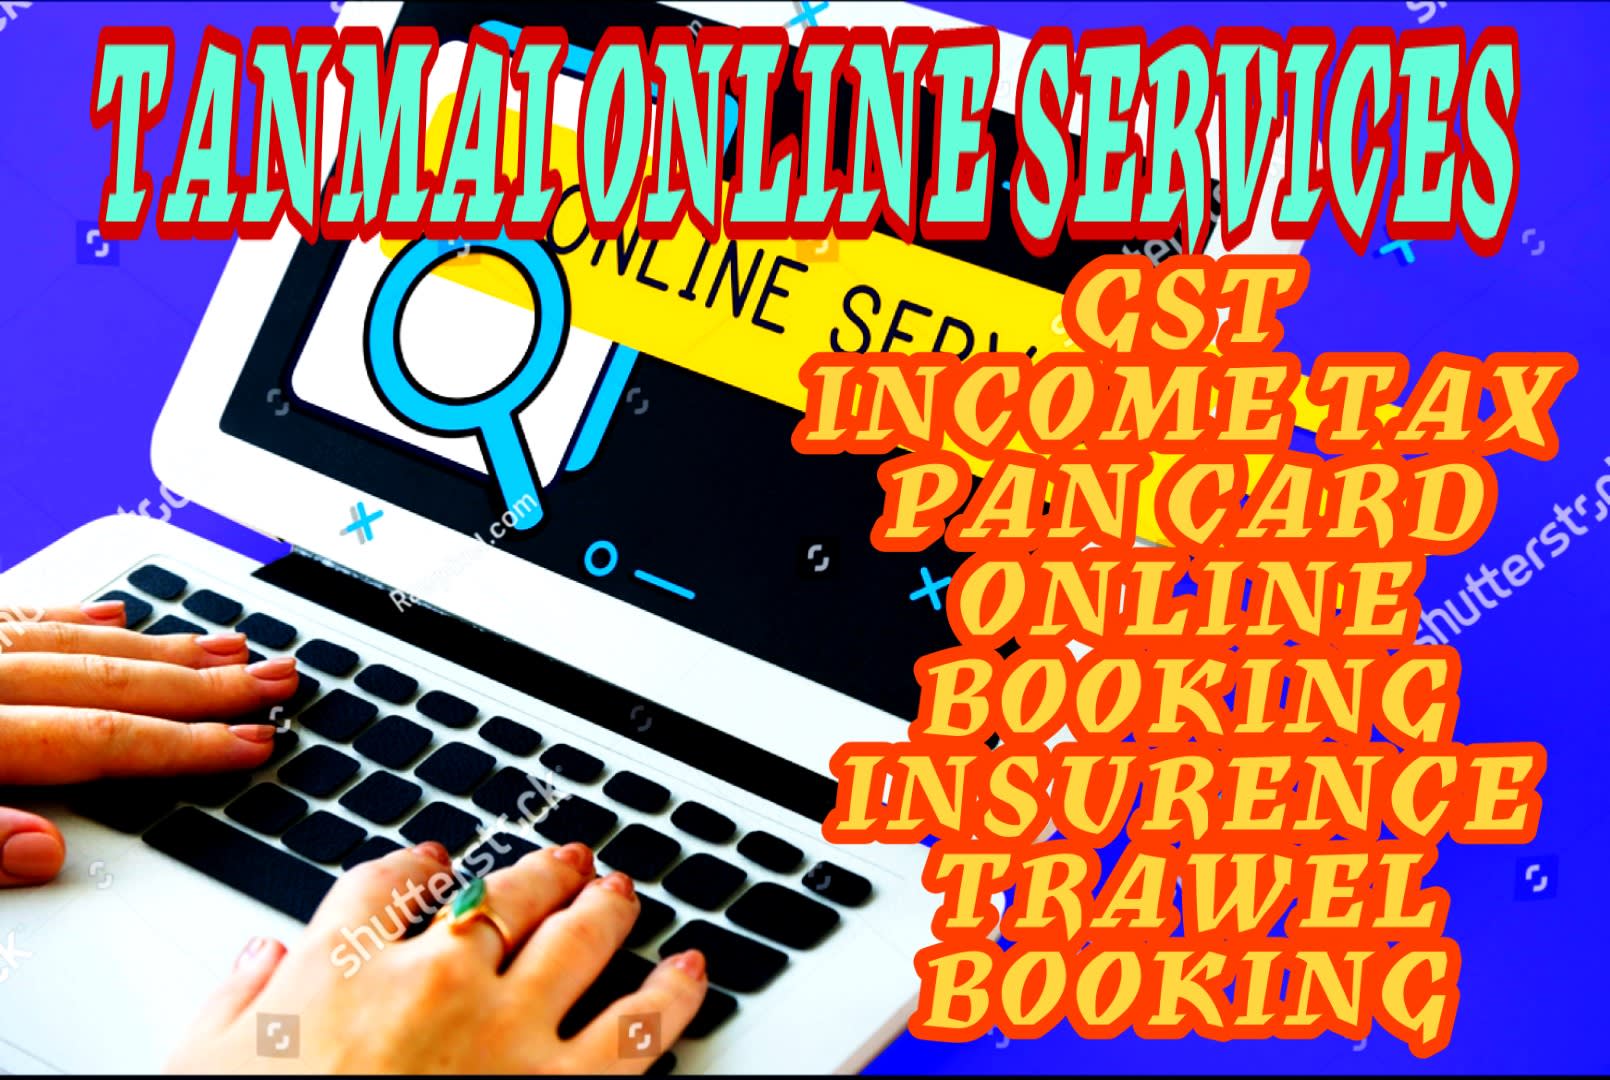 Tanmai Online Services